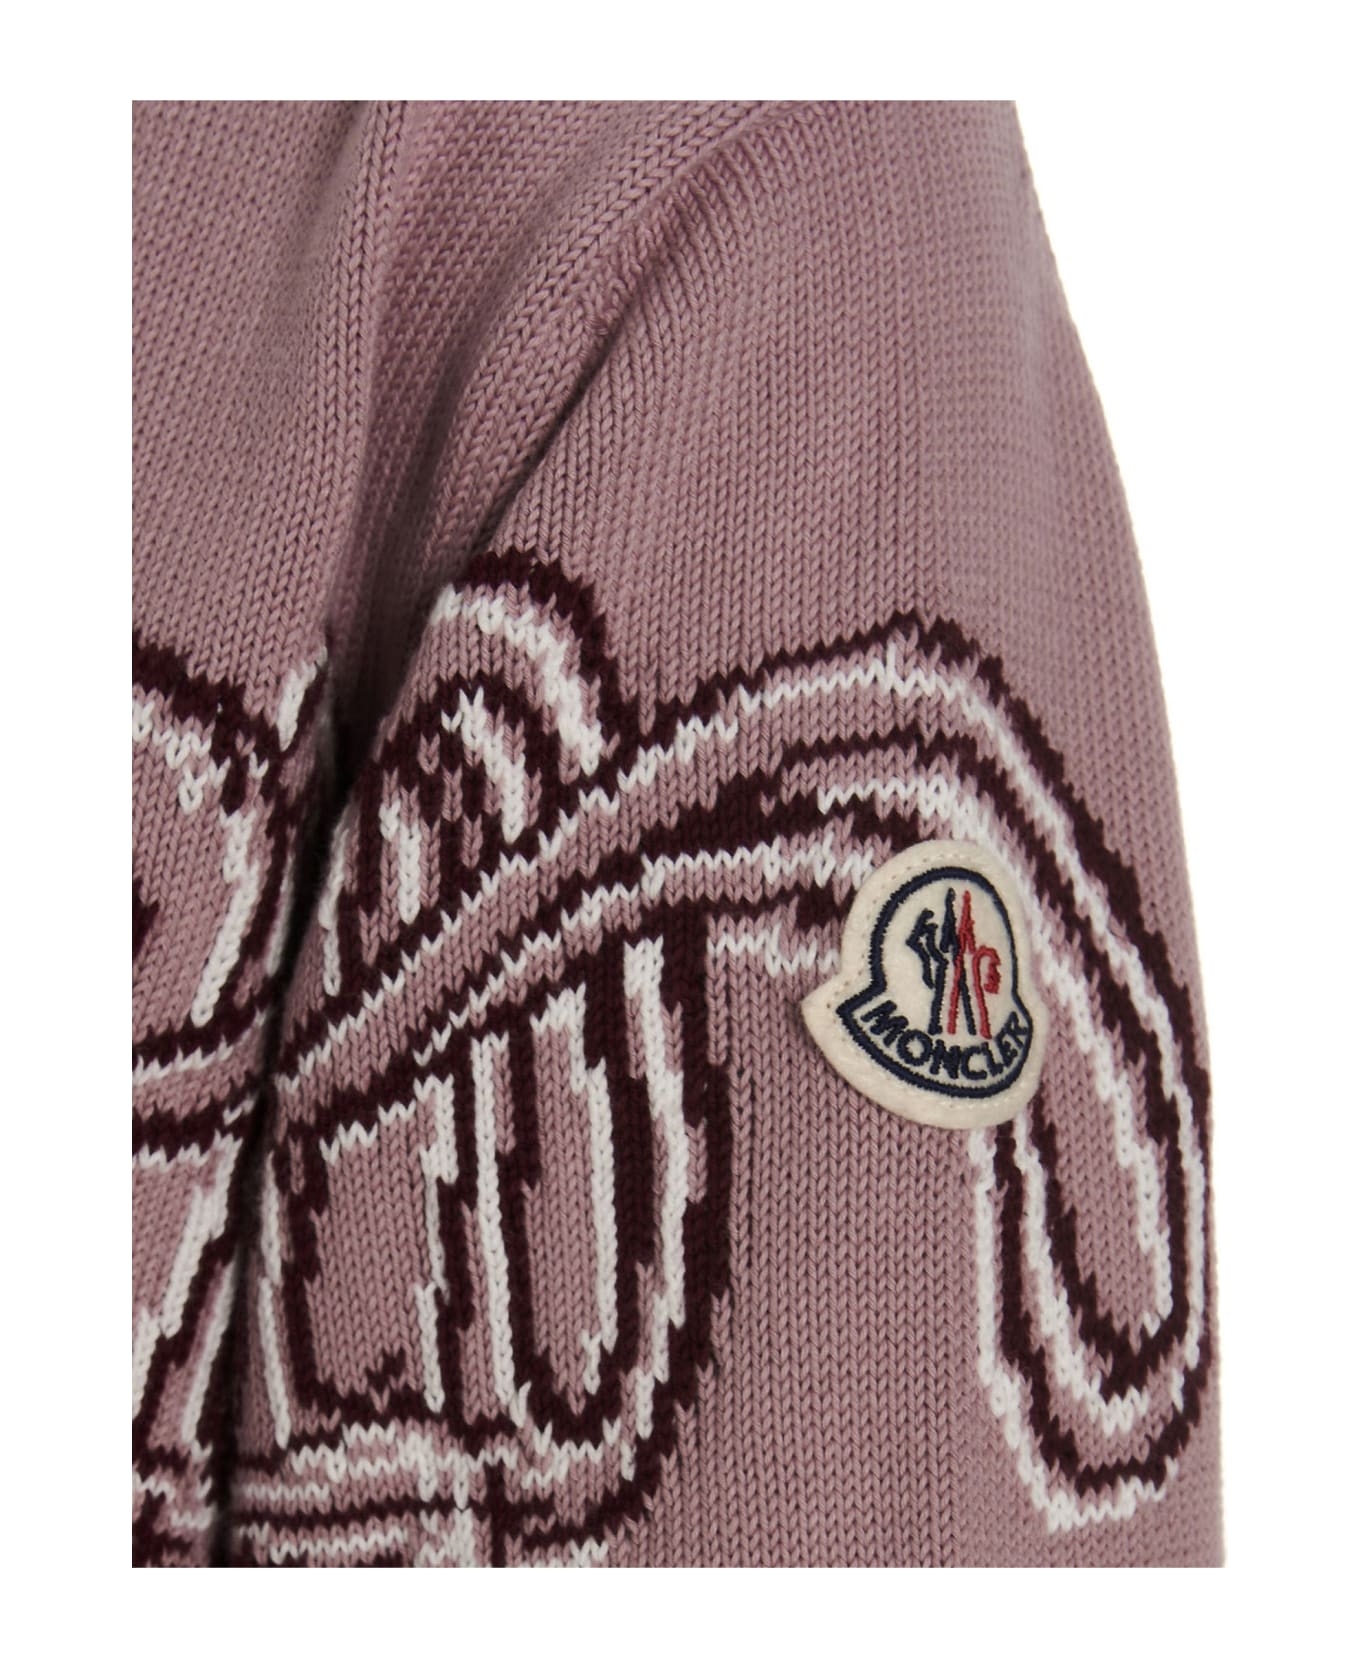 Moncler Cardigan Capsule Chinese New Year - Pink